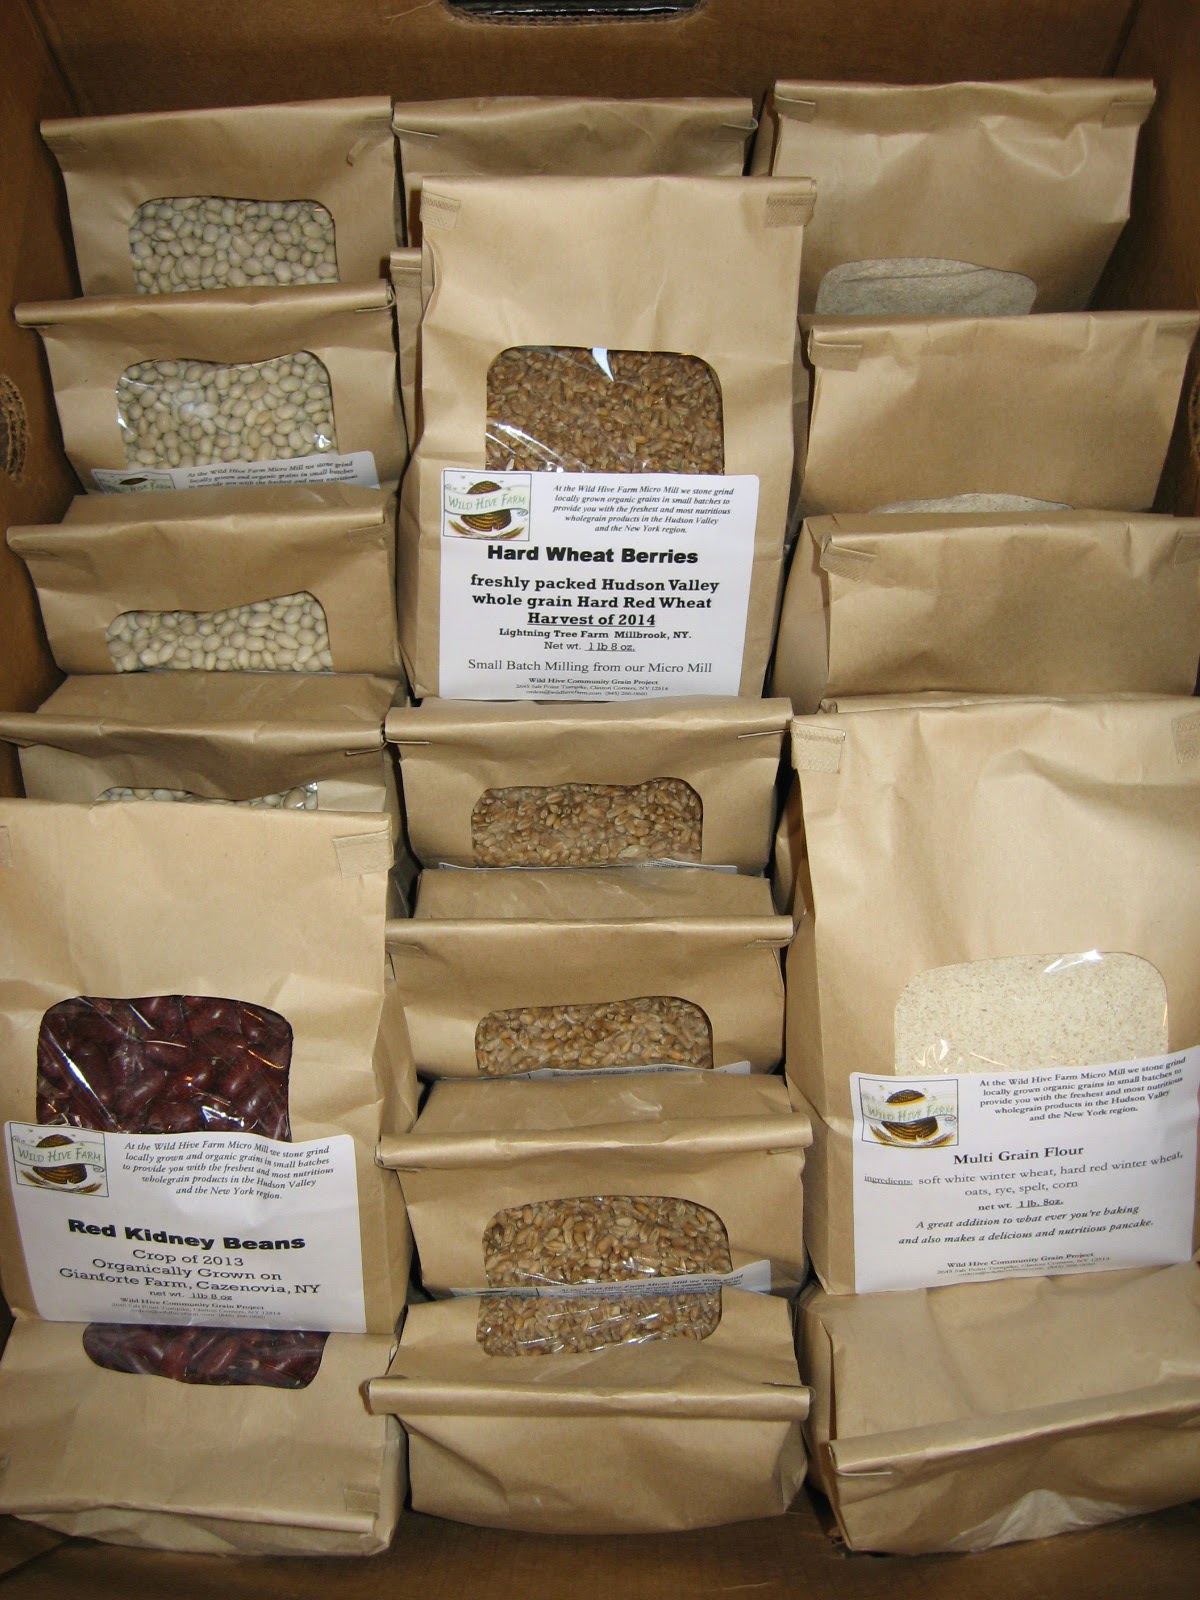 Wild Hive Farms grains and beans